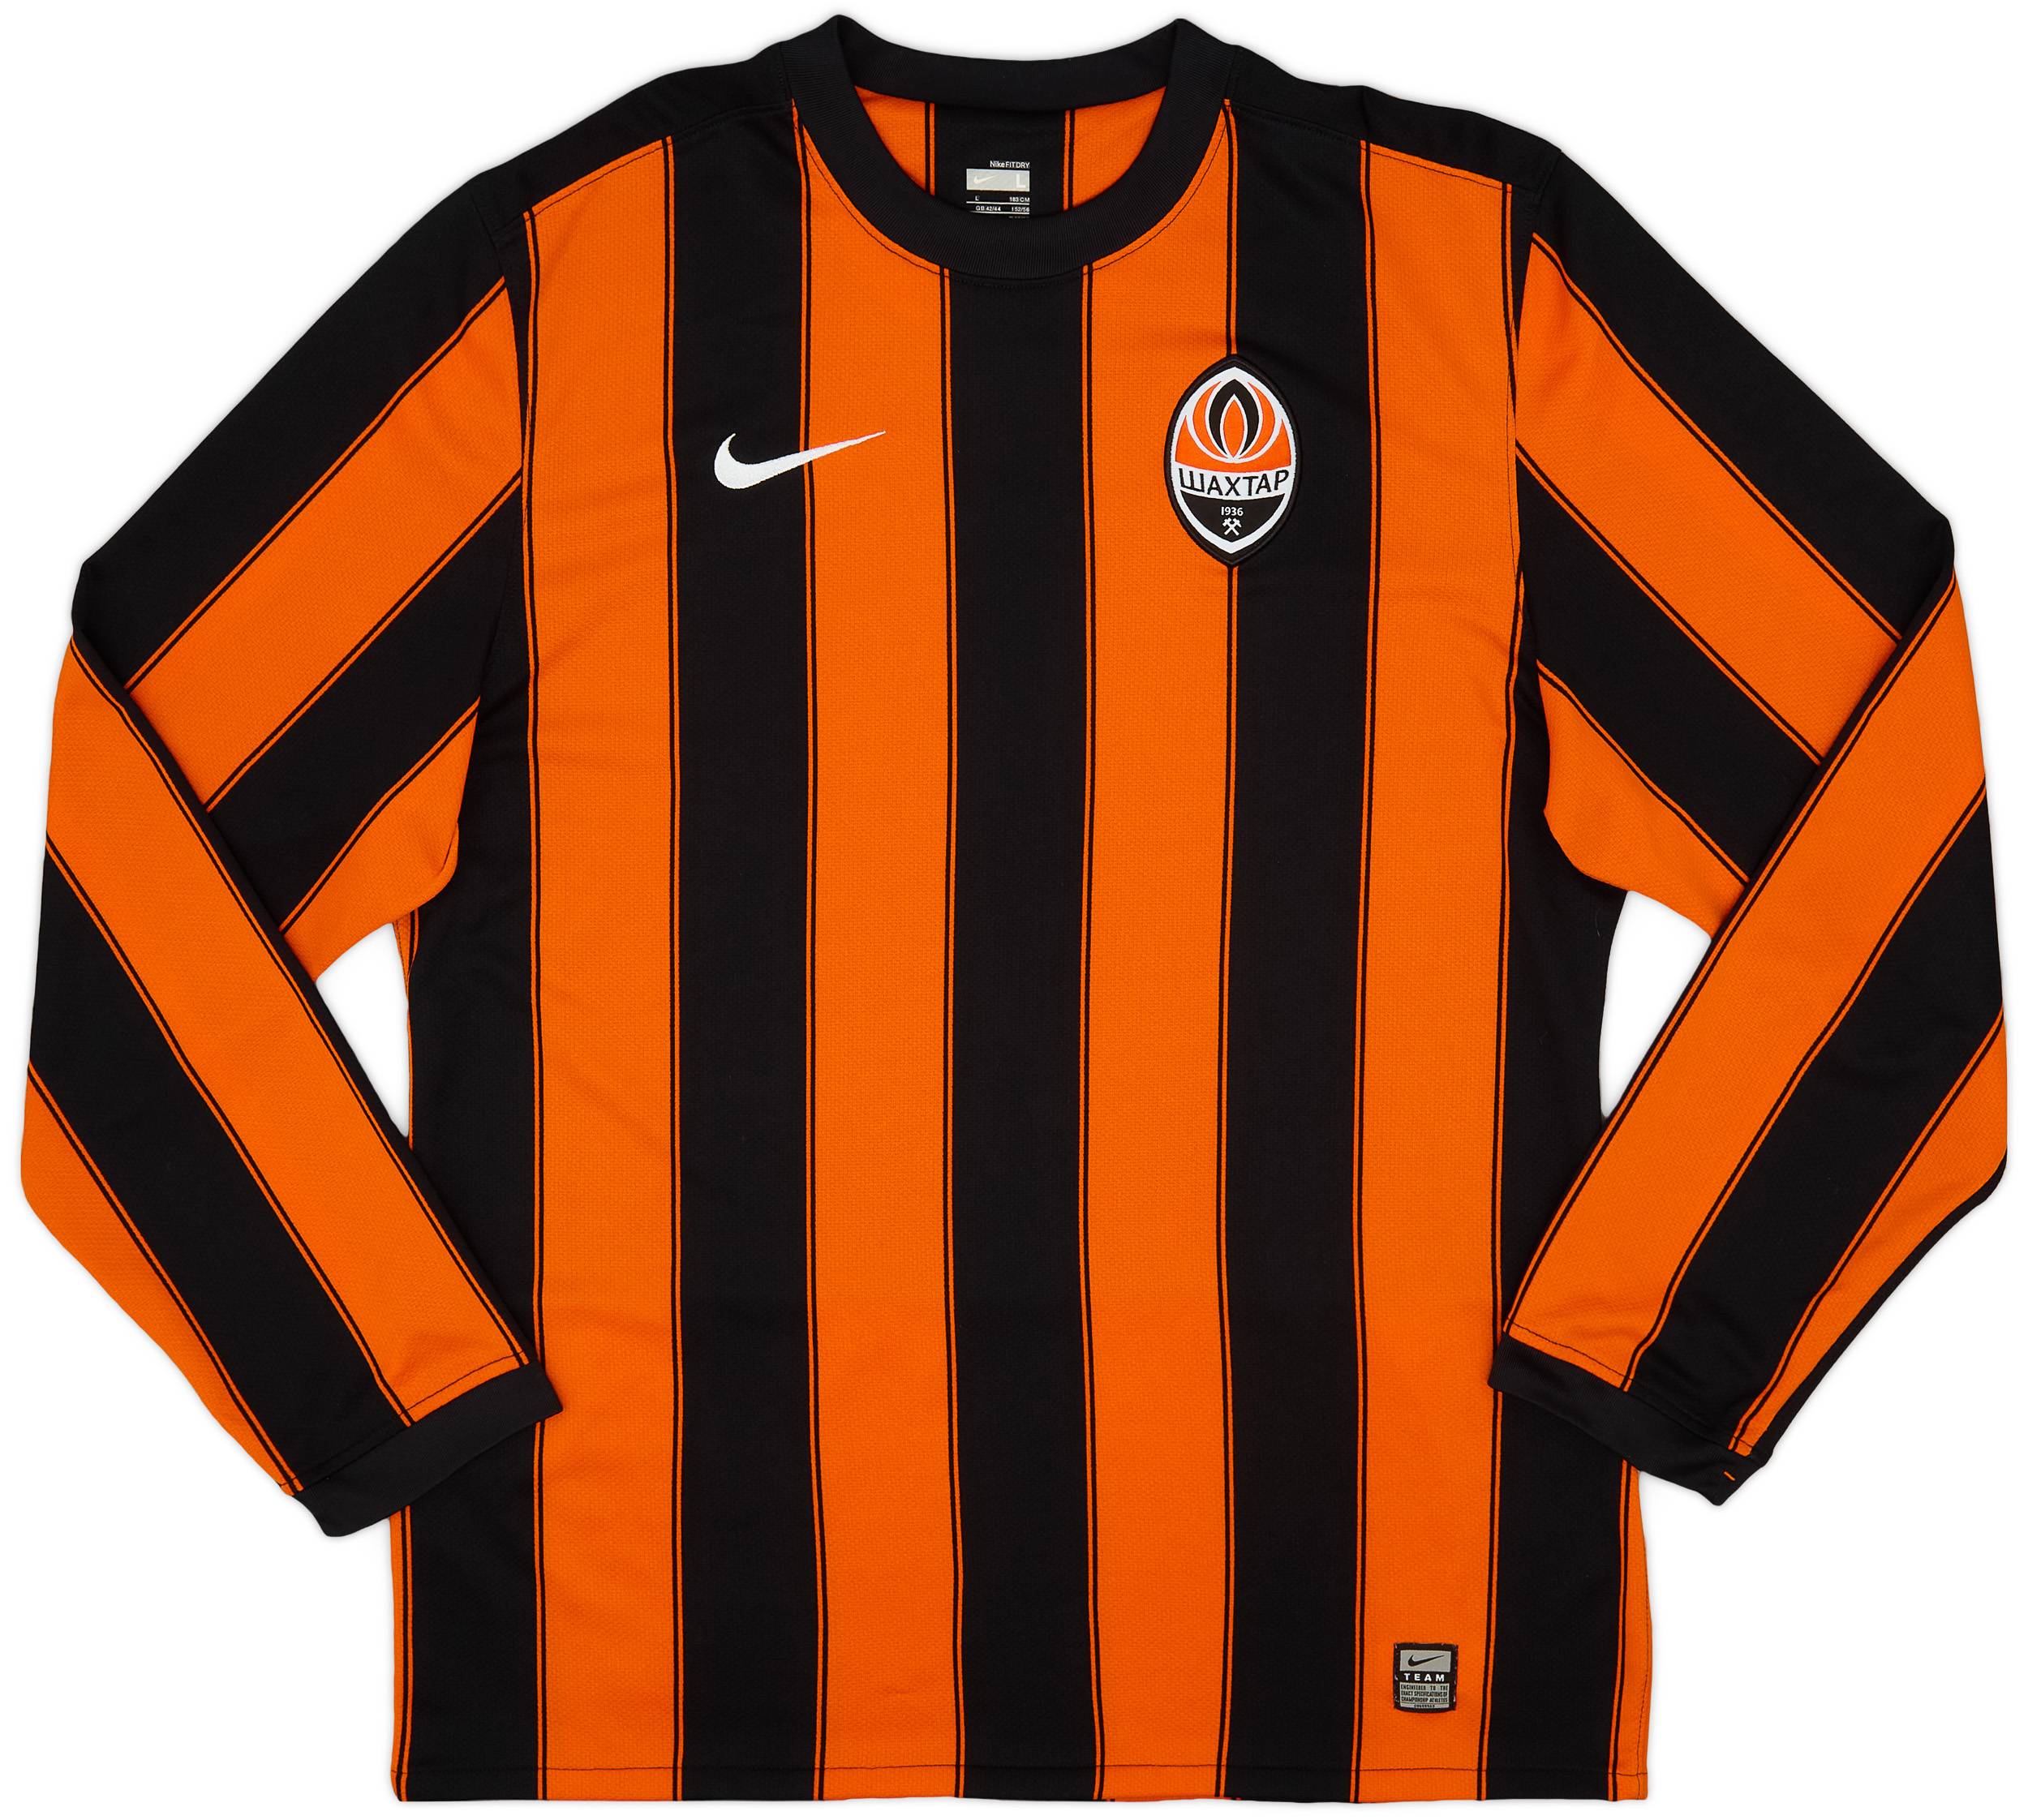 2009-10 Shakhtar Donetsk Player Issue Home L/S Shirt - 8/10 - (L)